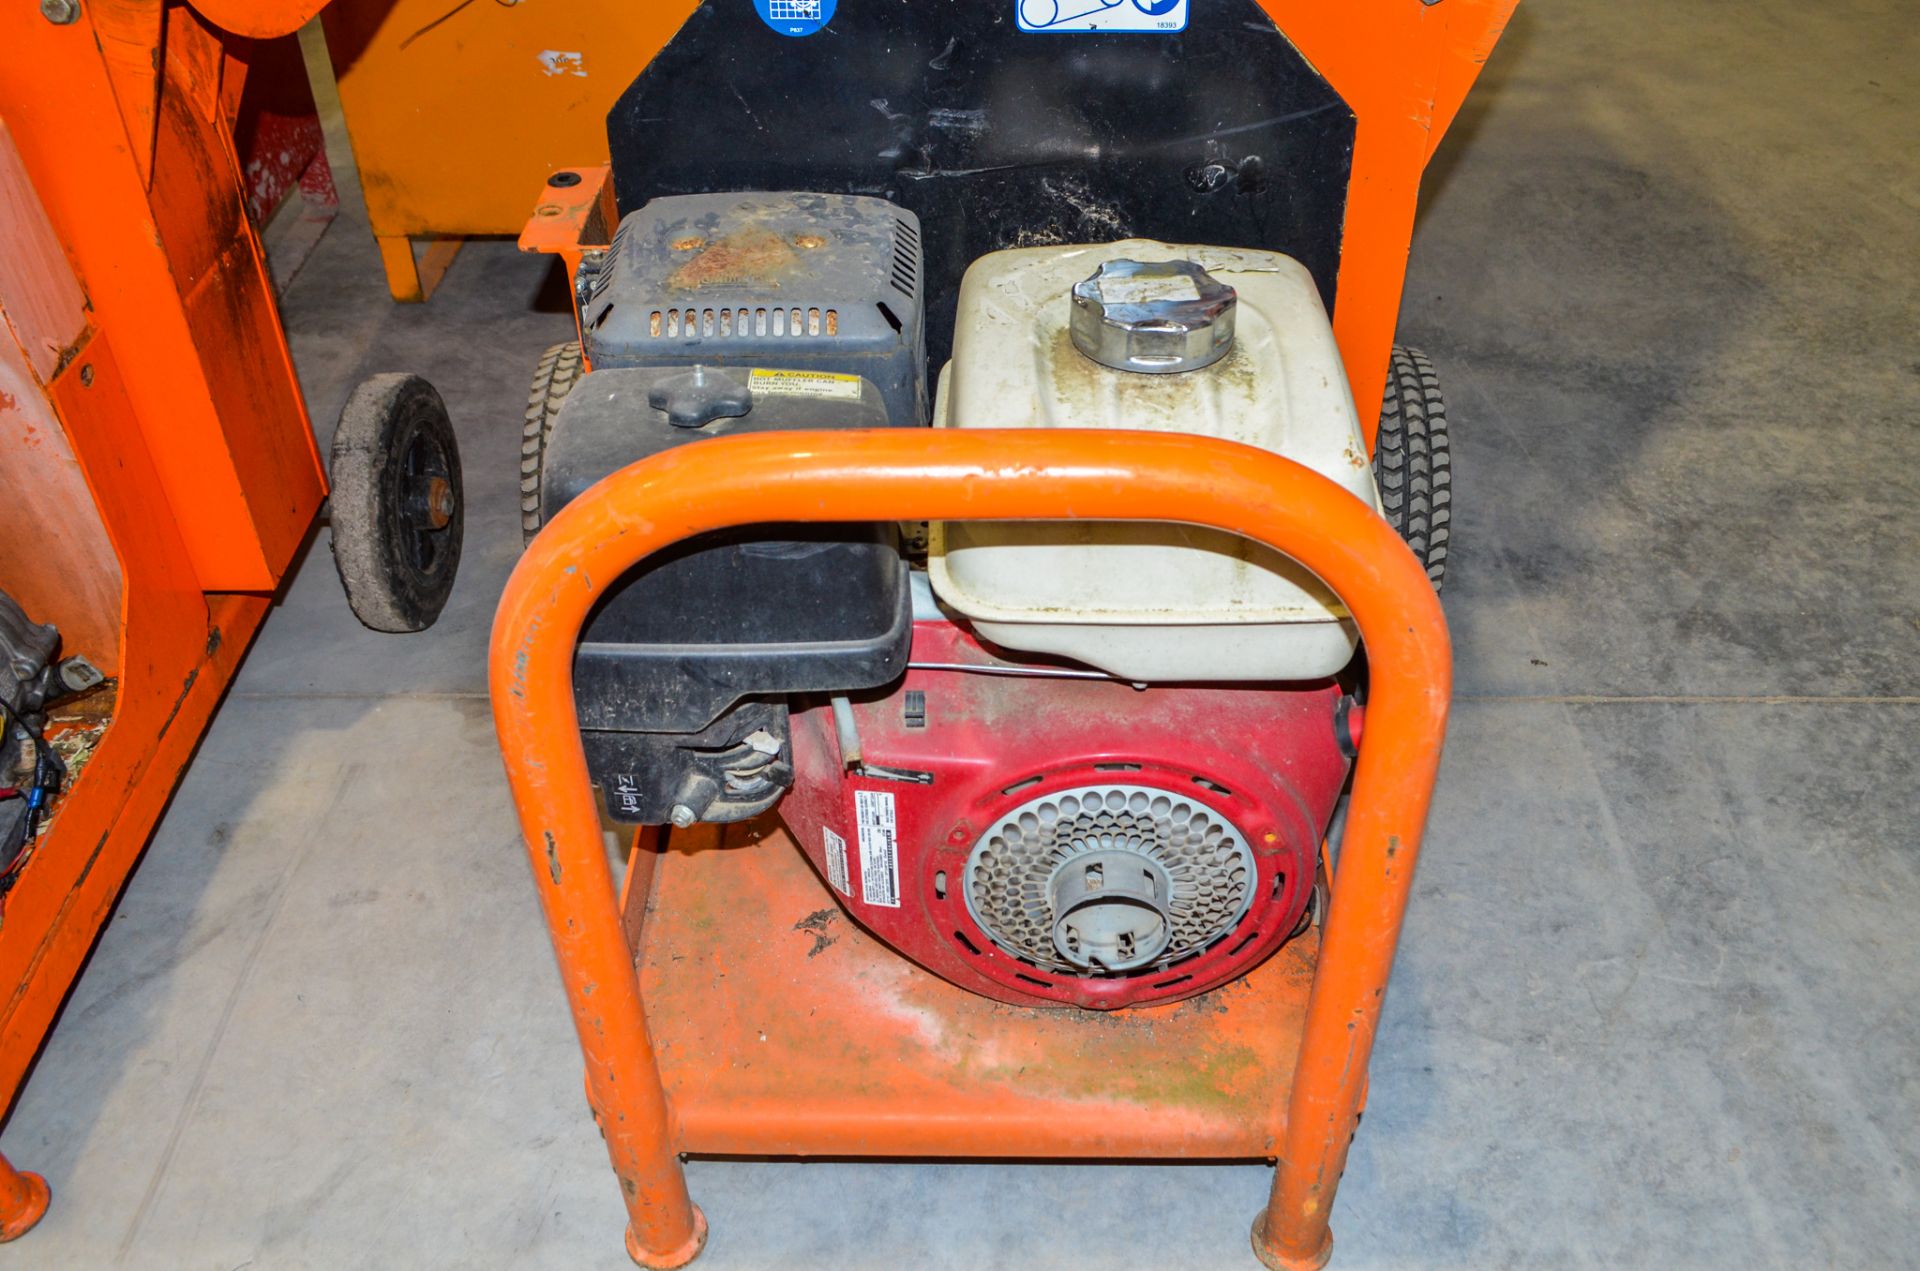 Timberwolf TW13/75G petrol driven wood chipper/shredder ** Pull cord assembly missing ** - Image 2 of 2